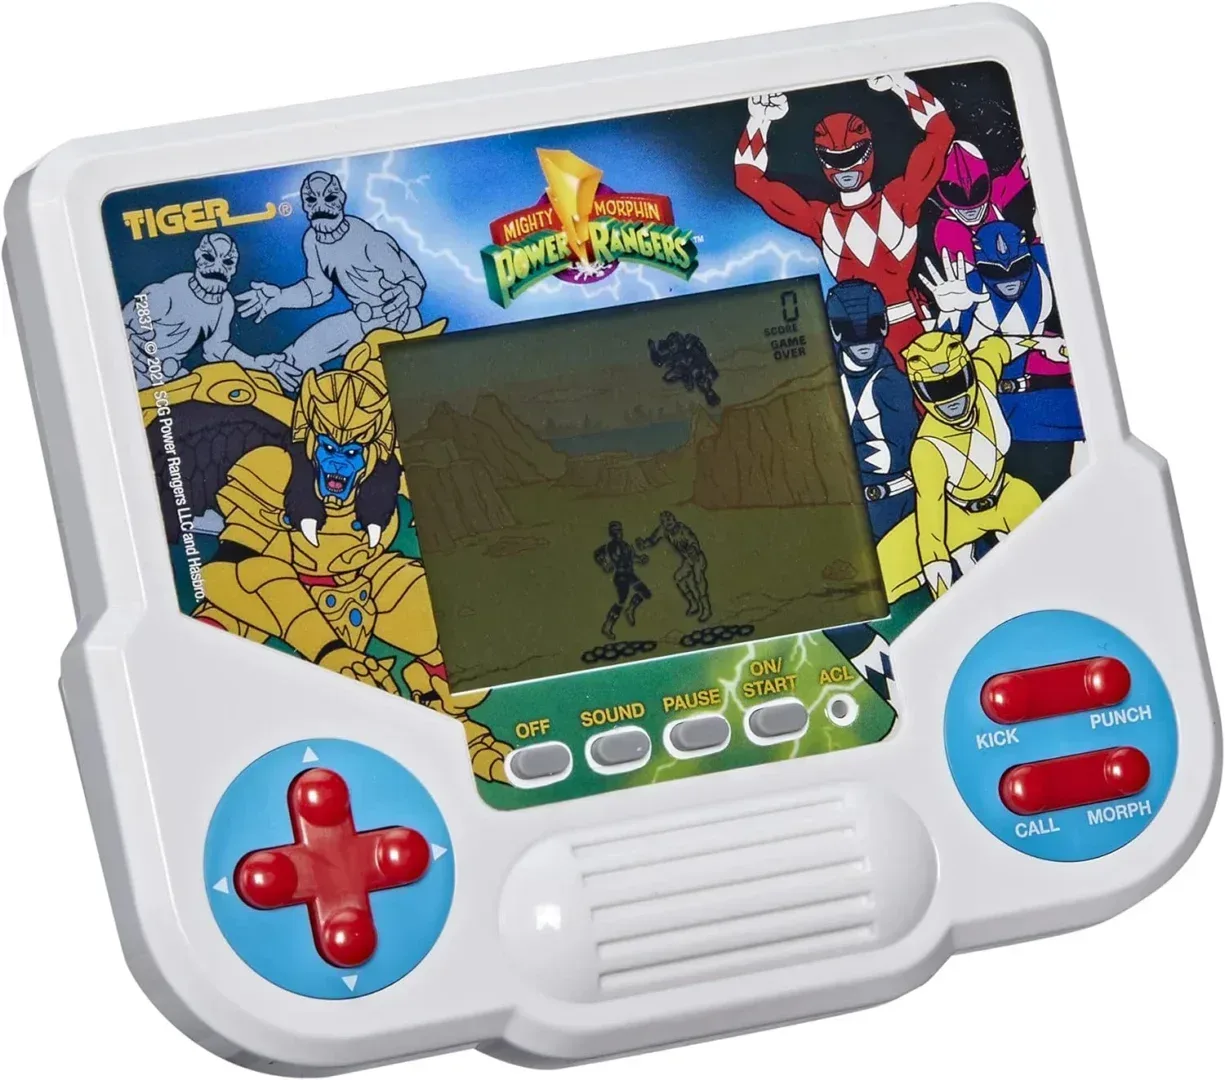 Hasbro Gaming Tiger Electronics Mighty Morphin Power Rangers Electronic LCD Video Game Review